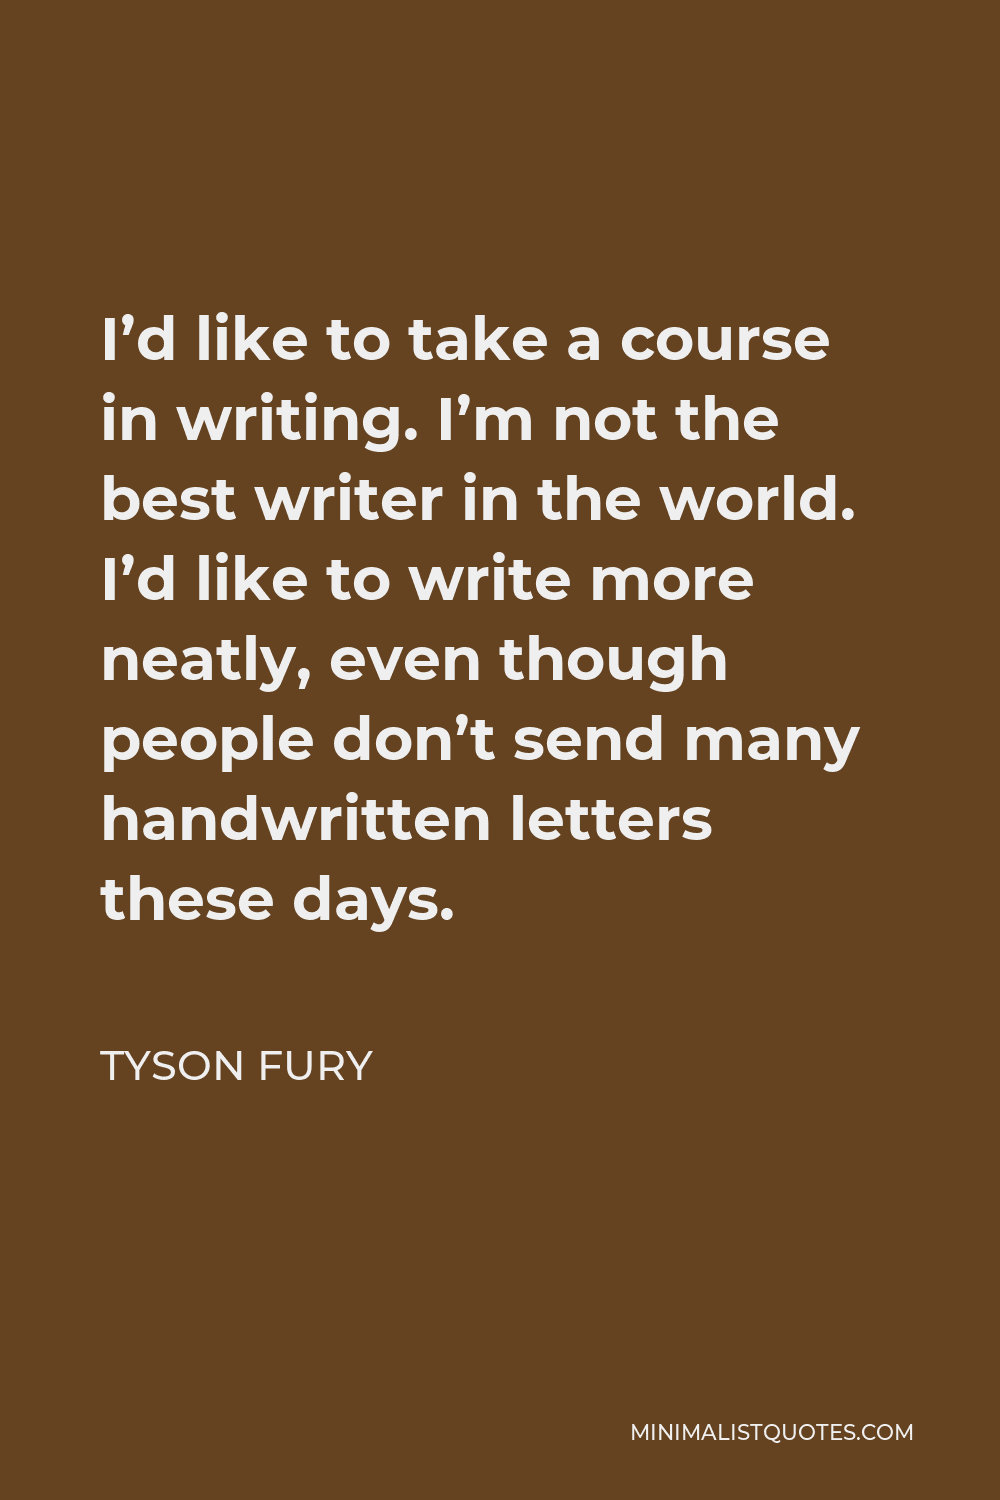 Tyson Fury Quote - I’d like to take a course in writing. I’m not the best writer in the world. I’d like to write more neatly, even though people don’t send many handwritten letters these days.